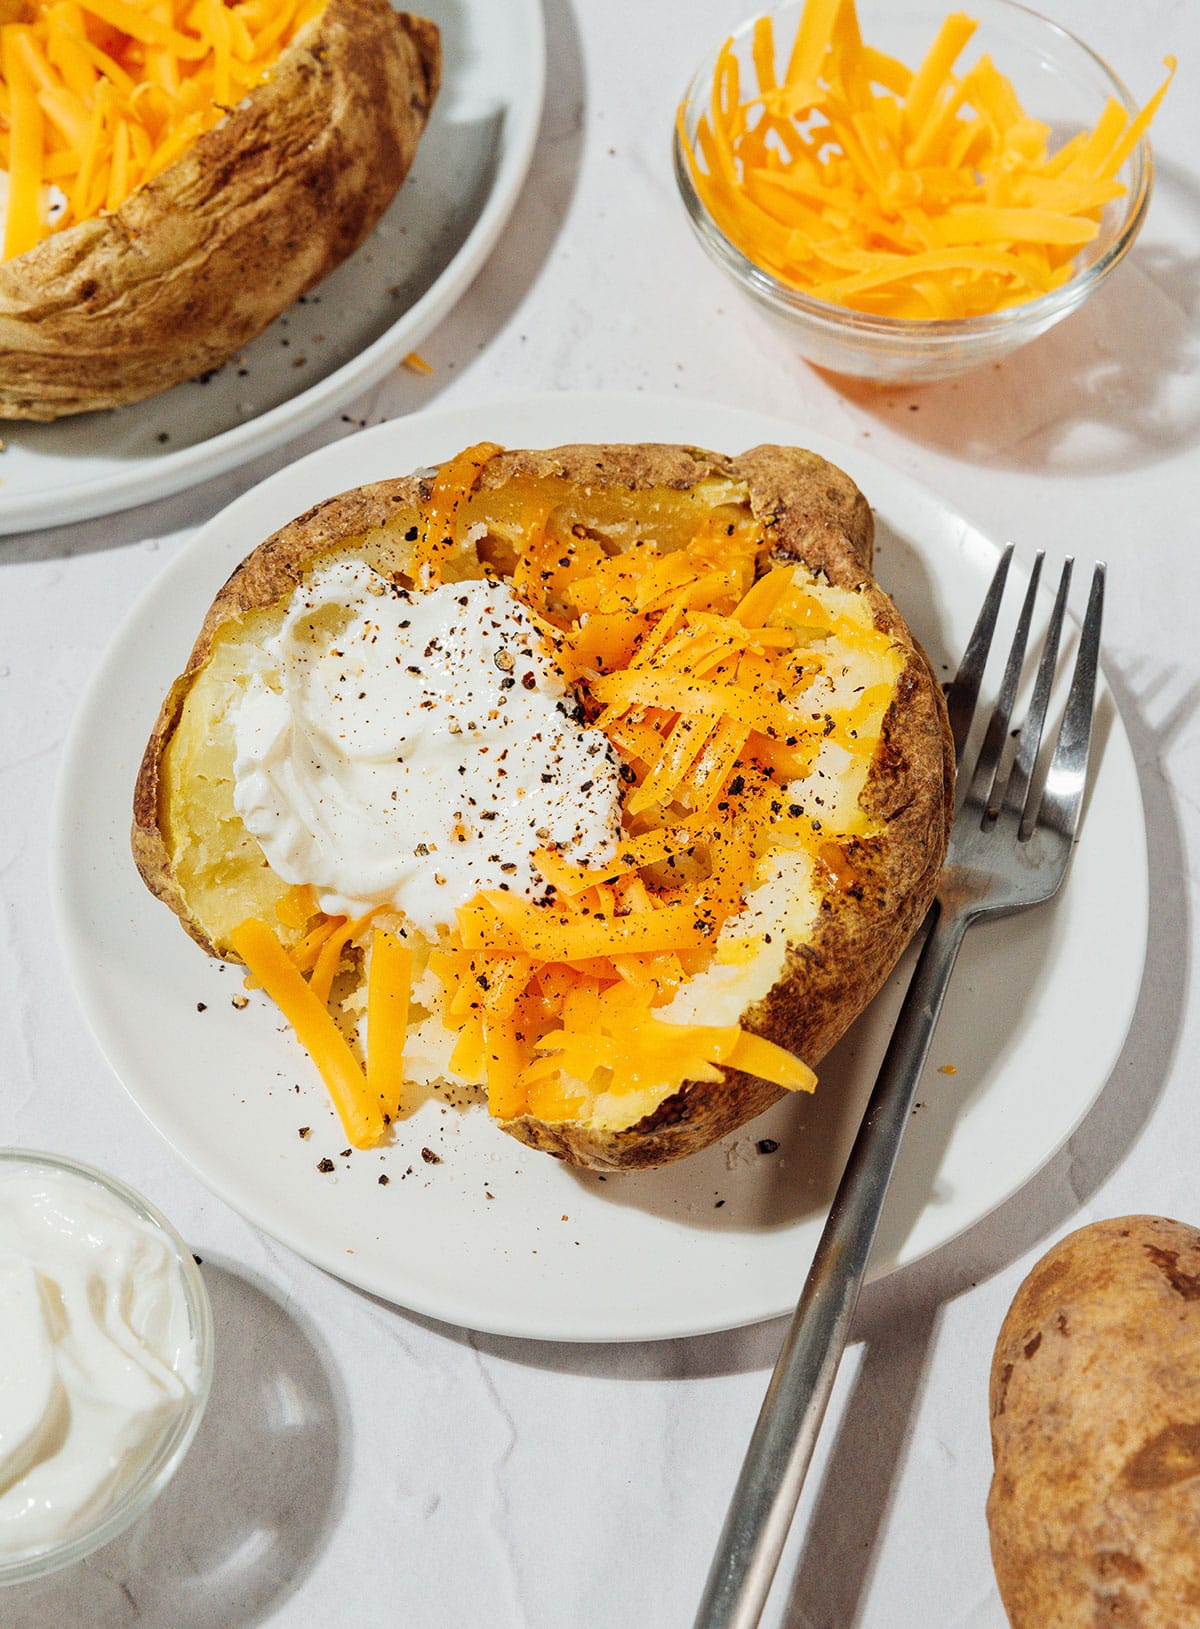 Baked potato with cheese and sour cream.